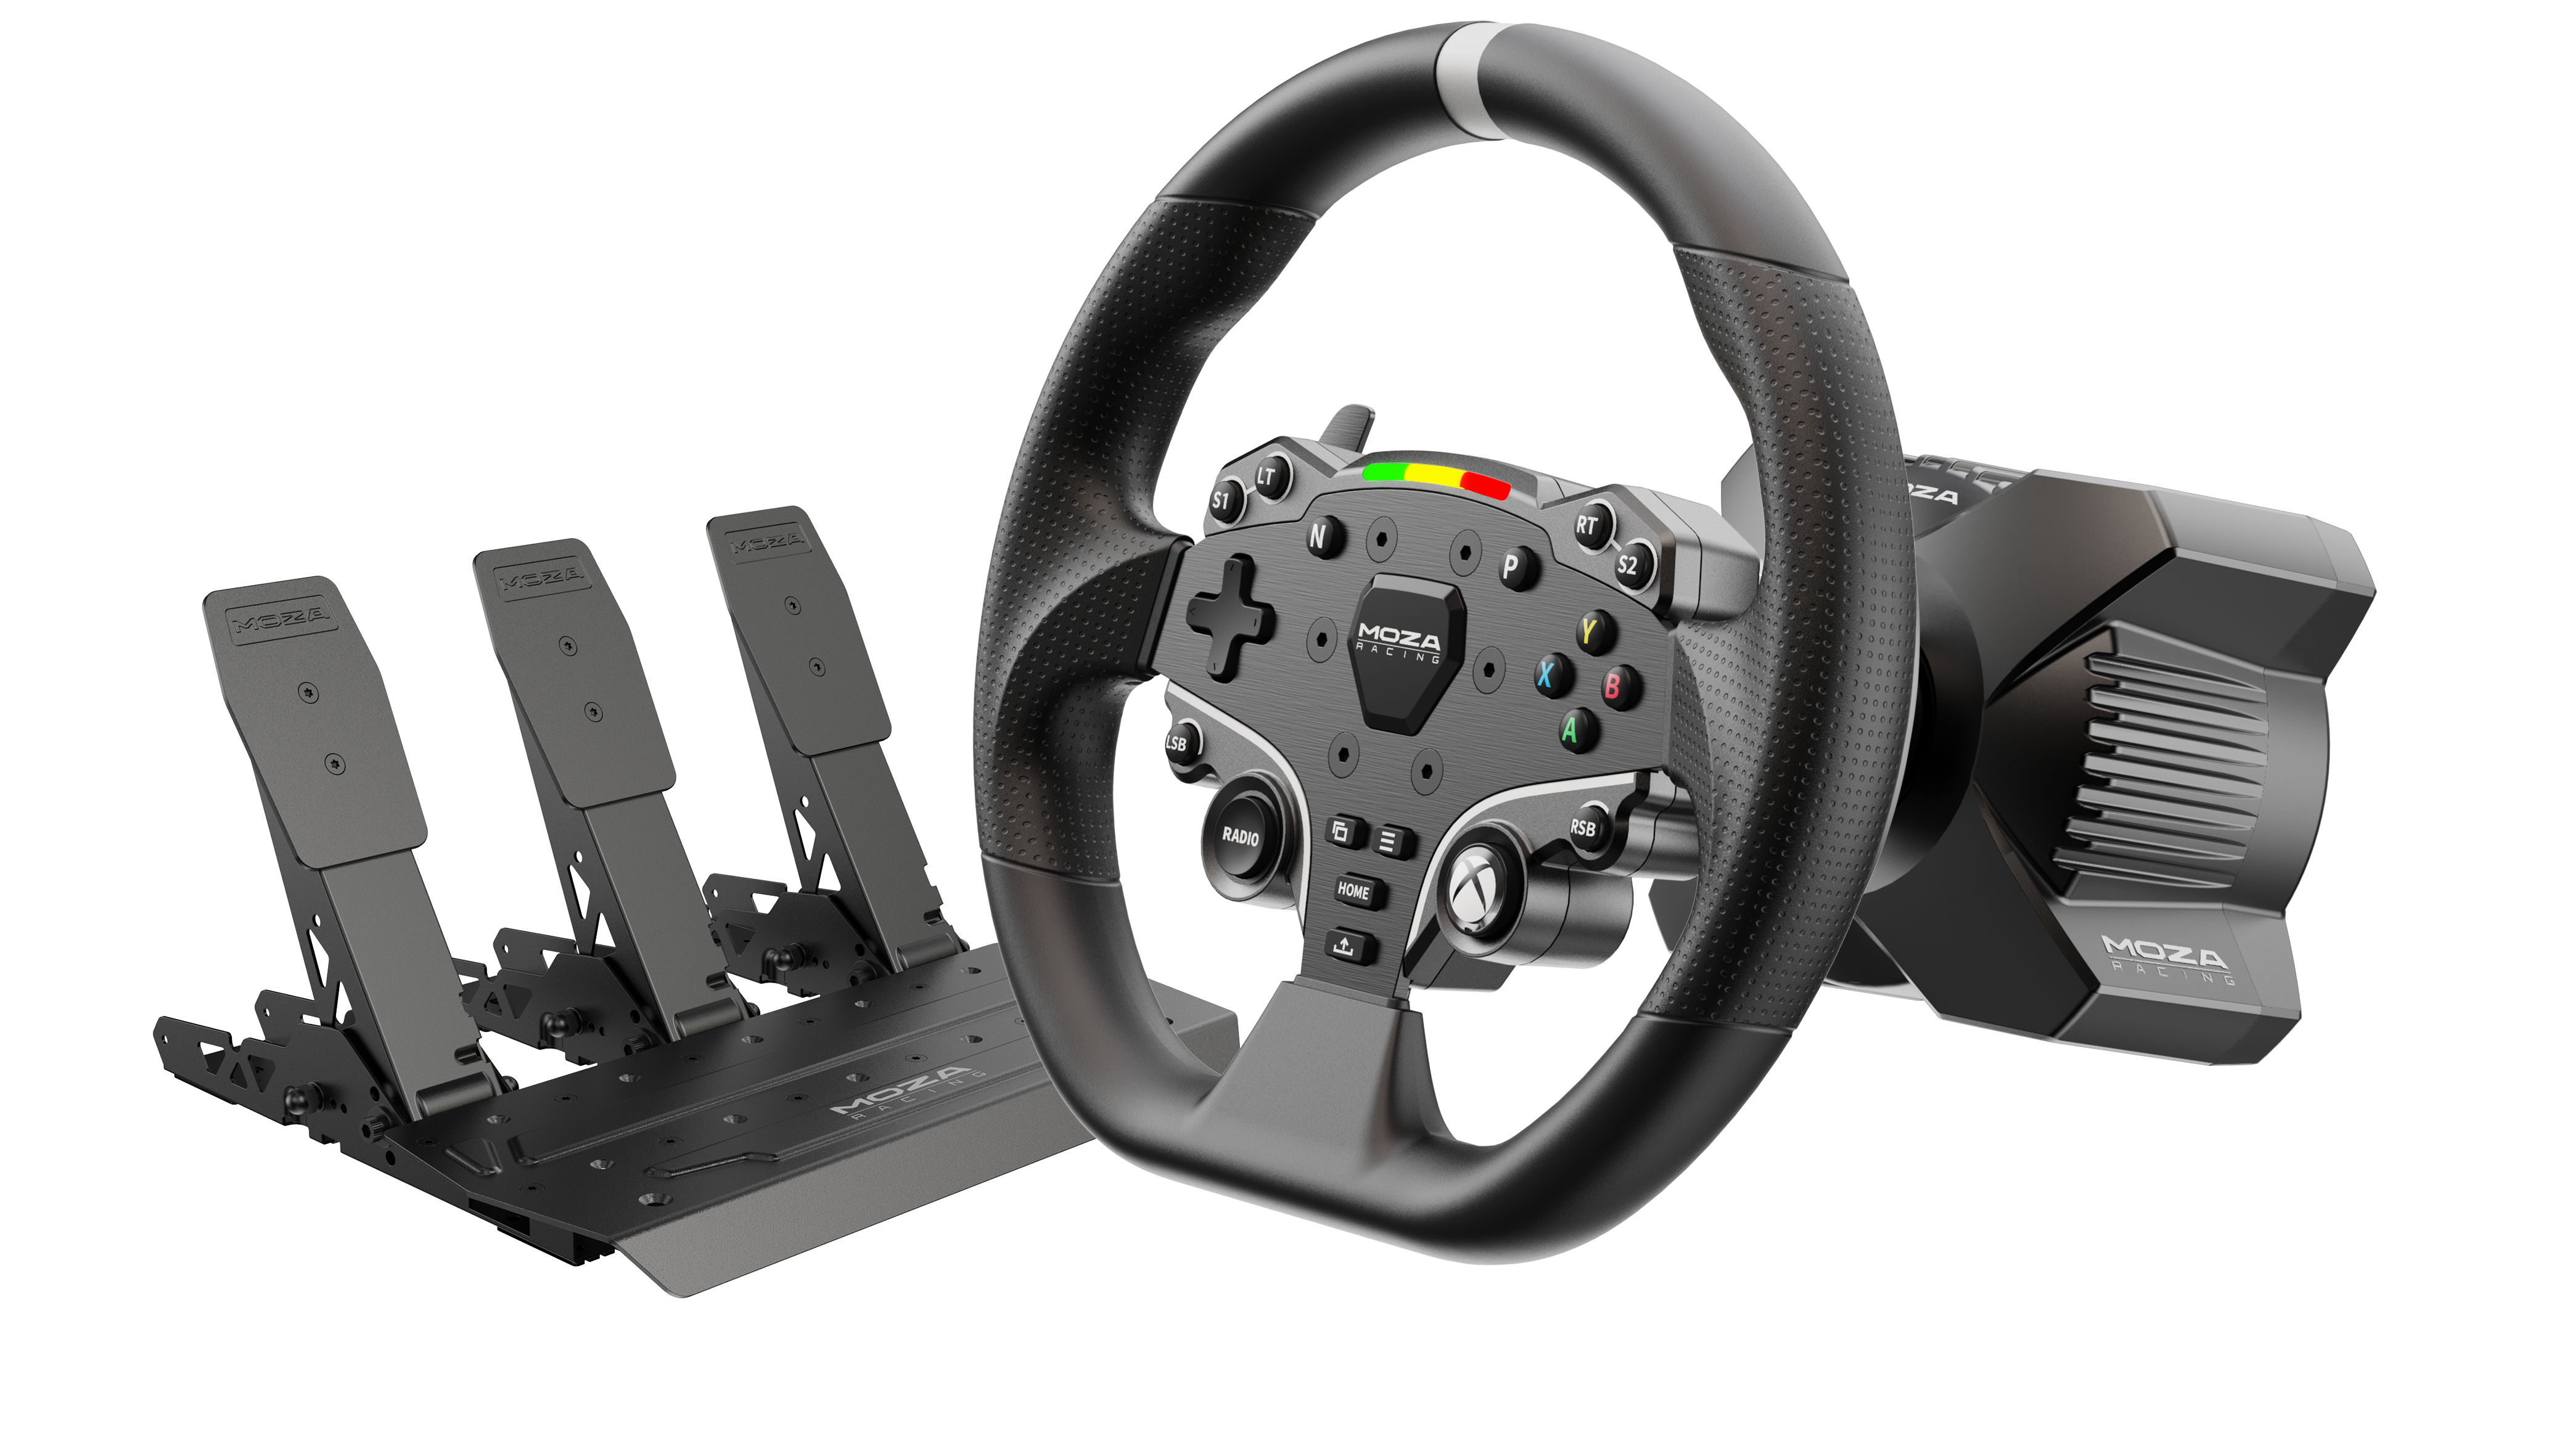 Moza R3 Racing Simulator (R3 Base, ES Wheel, SR-P Lite Two Pedals, table clamp)